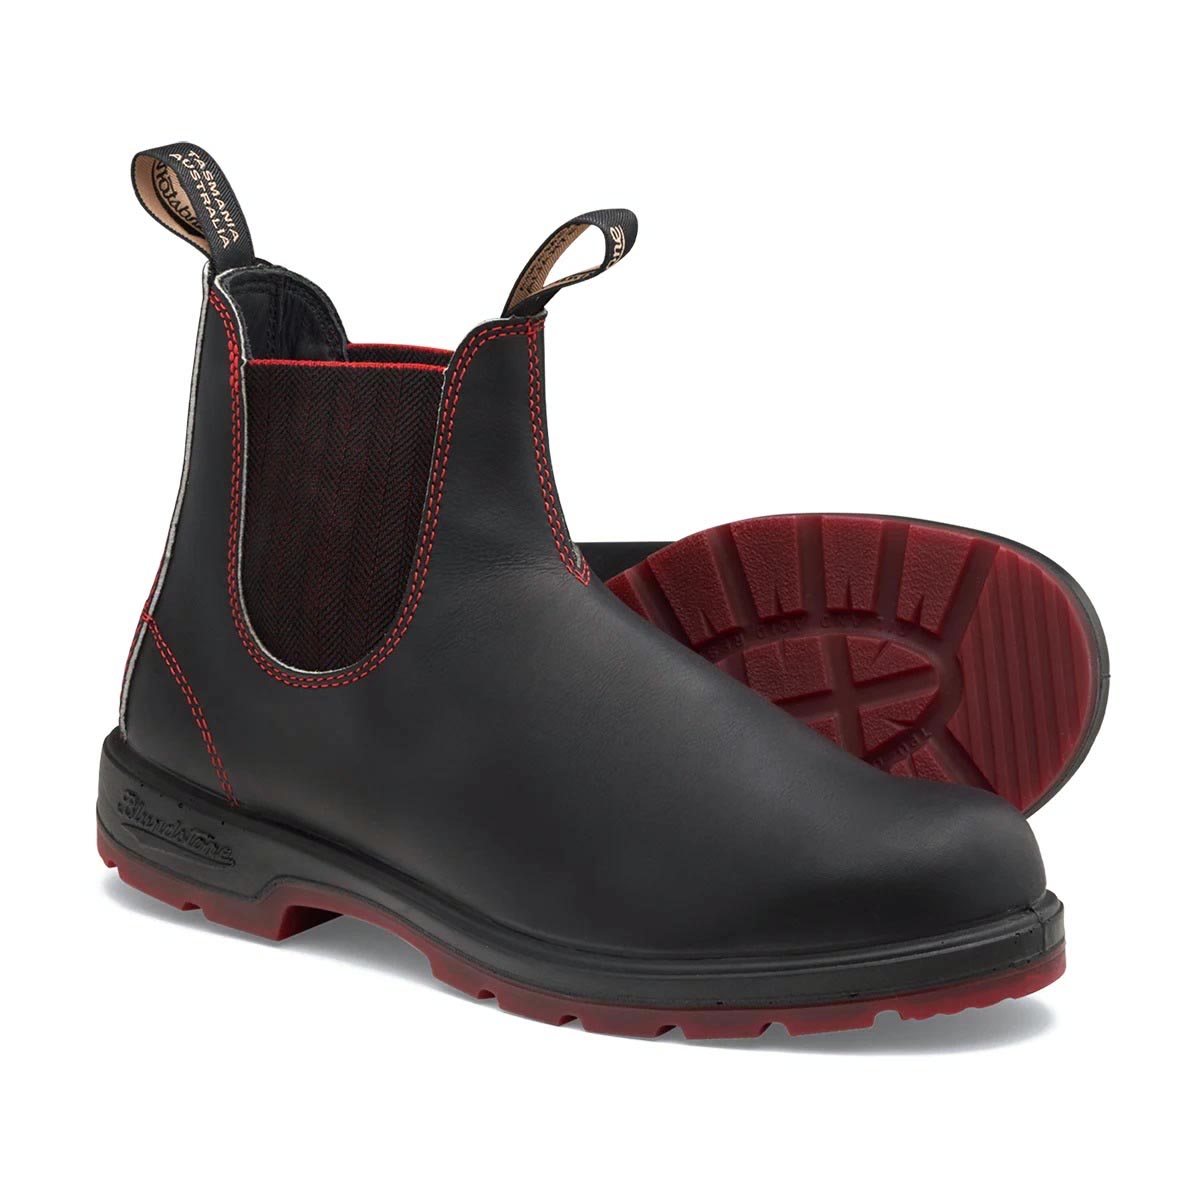 Blundstone Classic Chelsea Boots - Black/Red